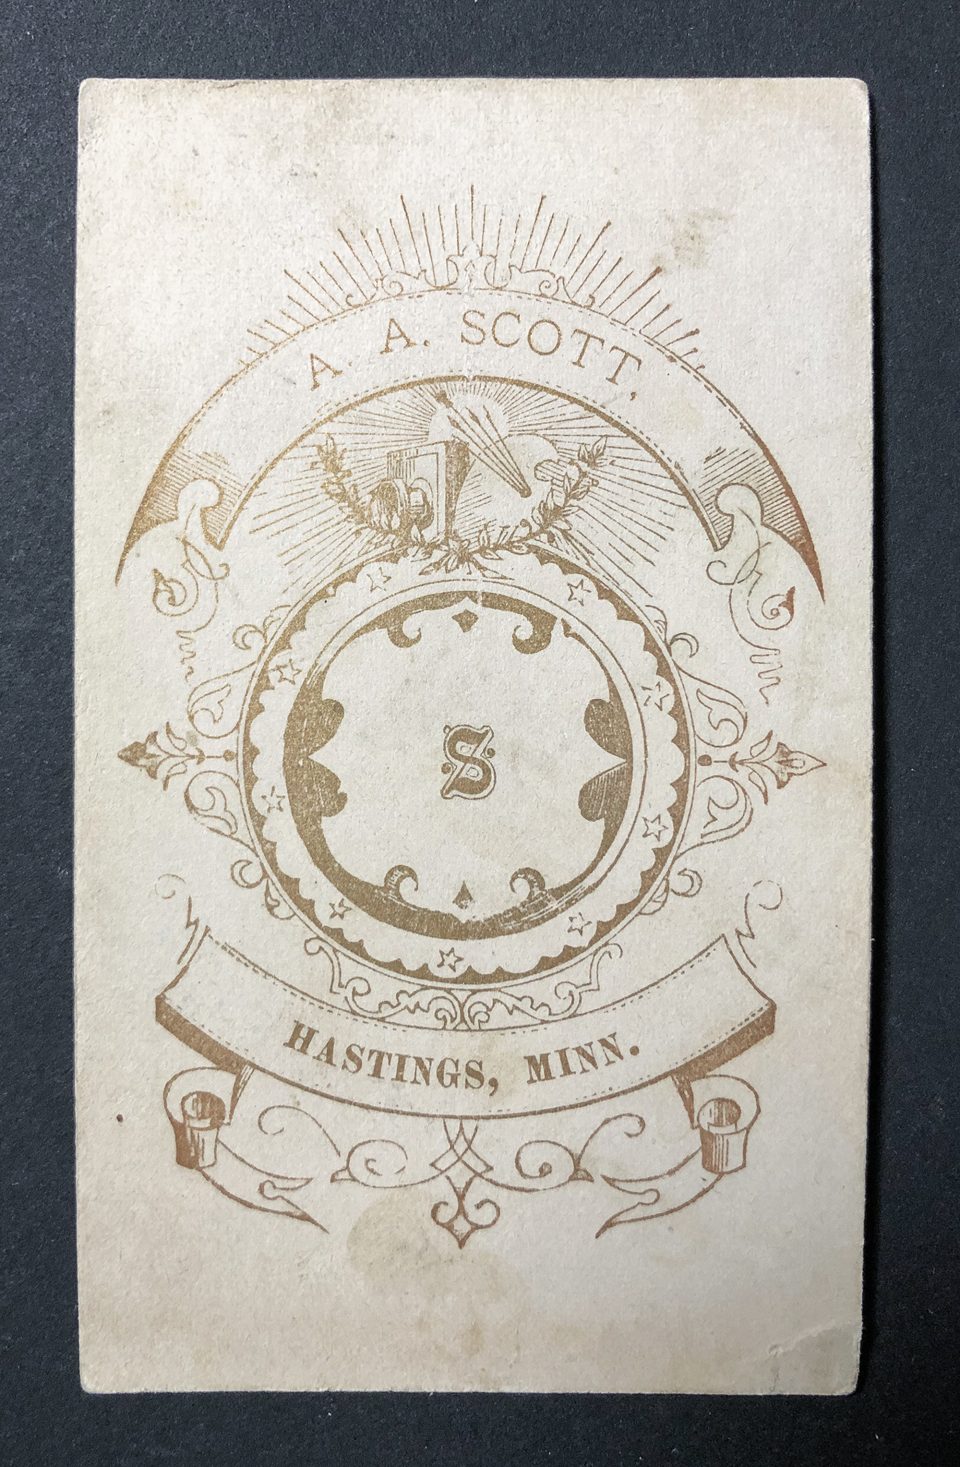 The back of this card was printed in gold ink and says "A.A. Scott, Hastings, Minn." There's a capital S centered amidst the ornate Sullivanesque graphic design.